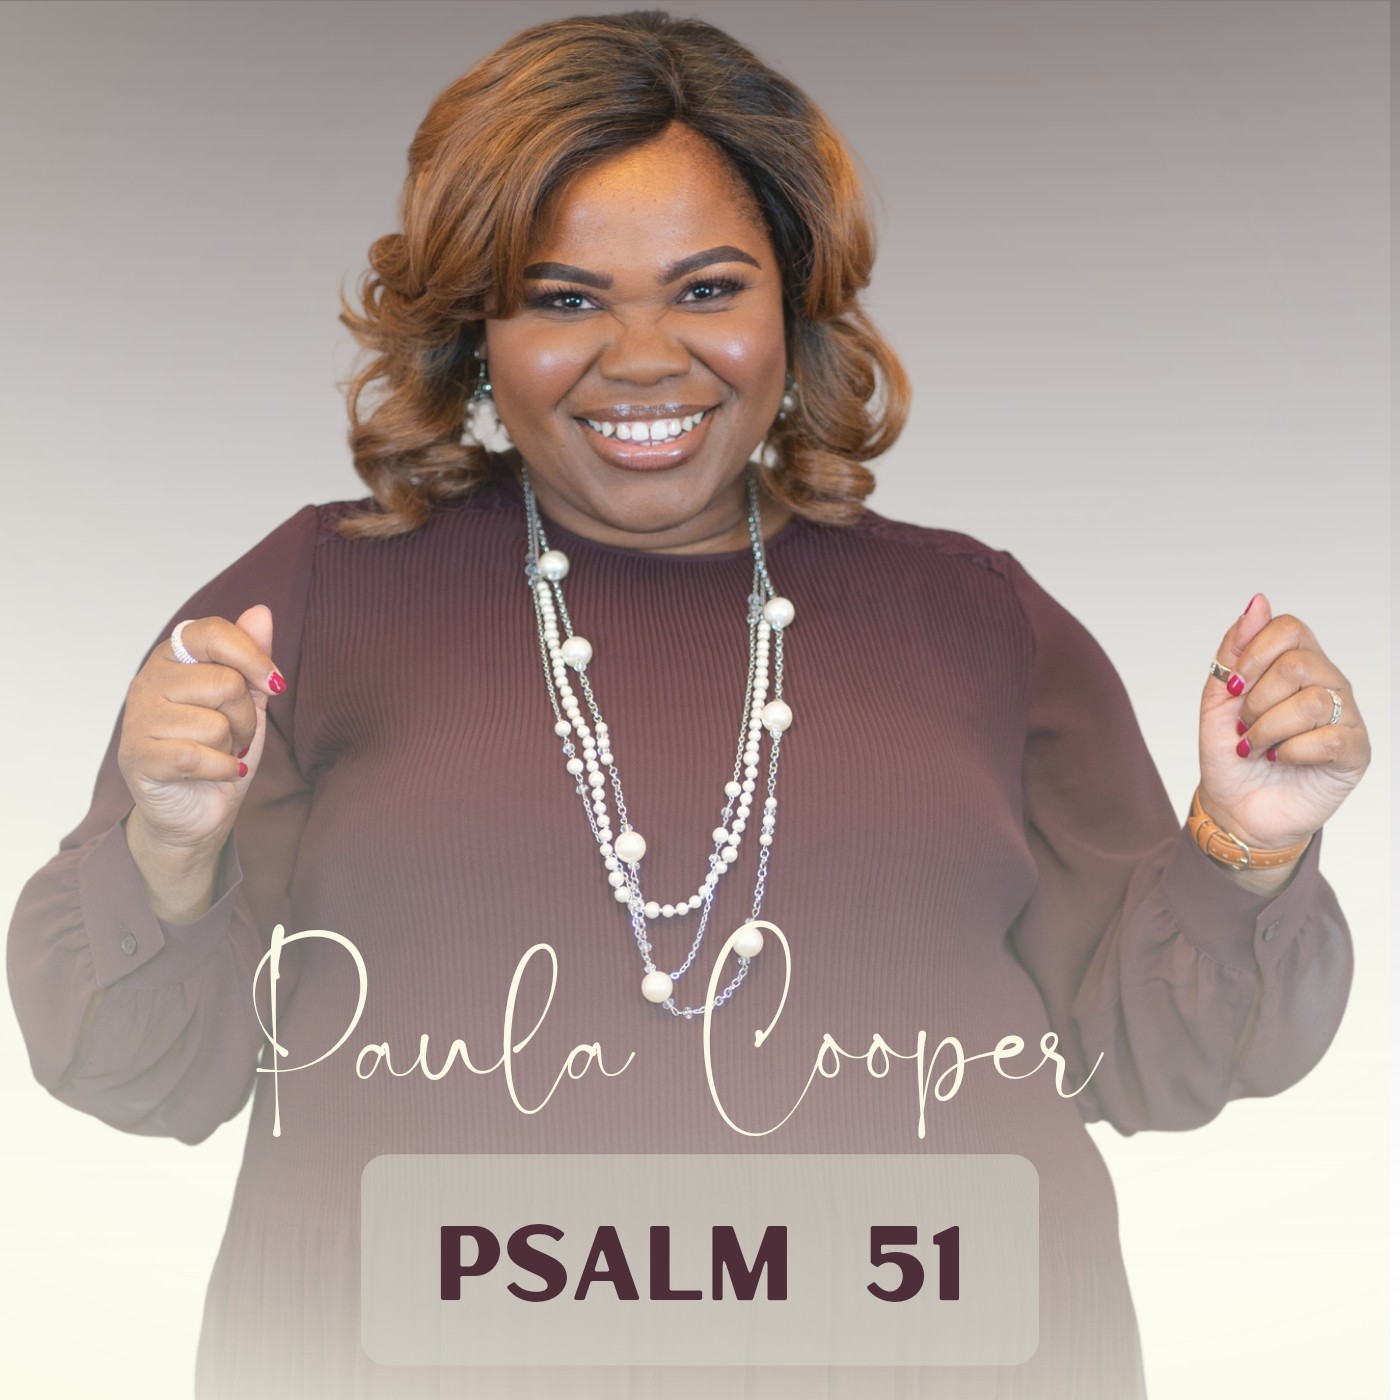 Art for Psalm 51 by Paula Cooper